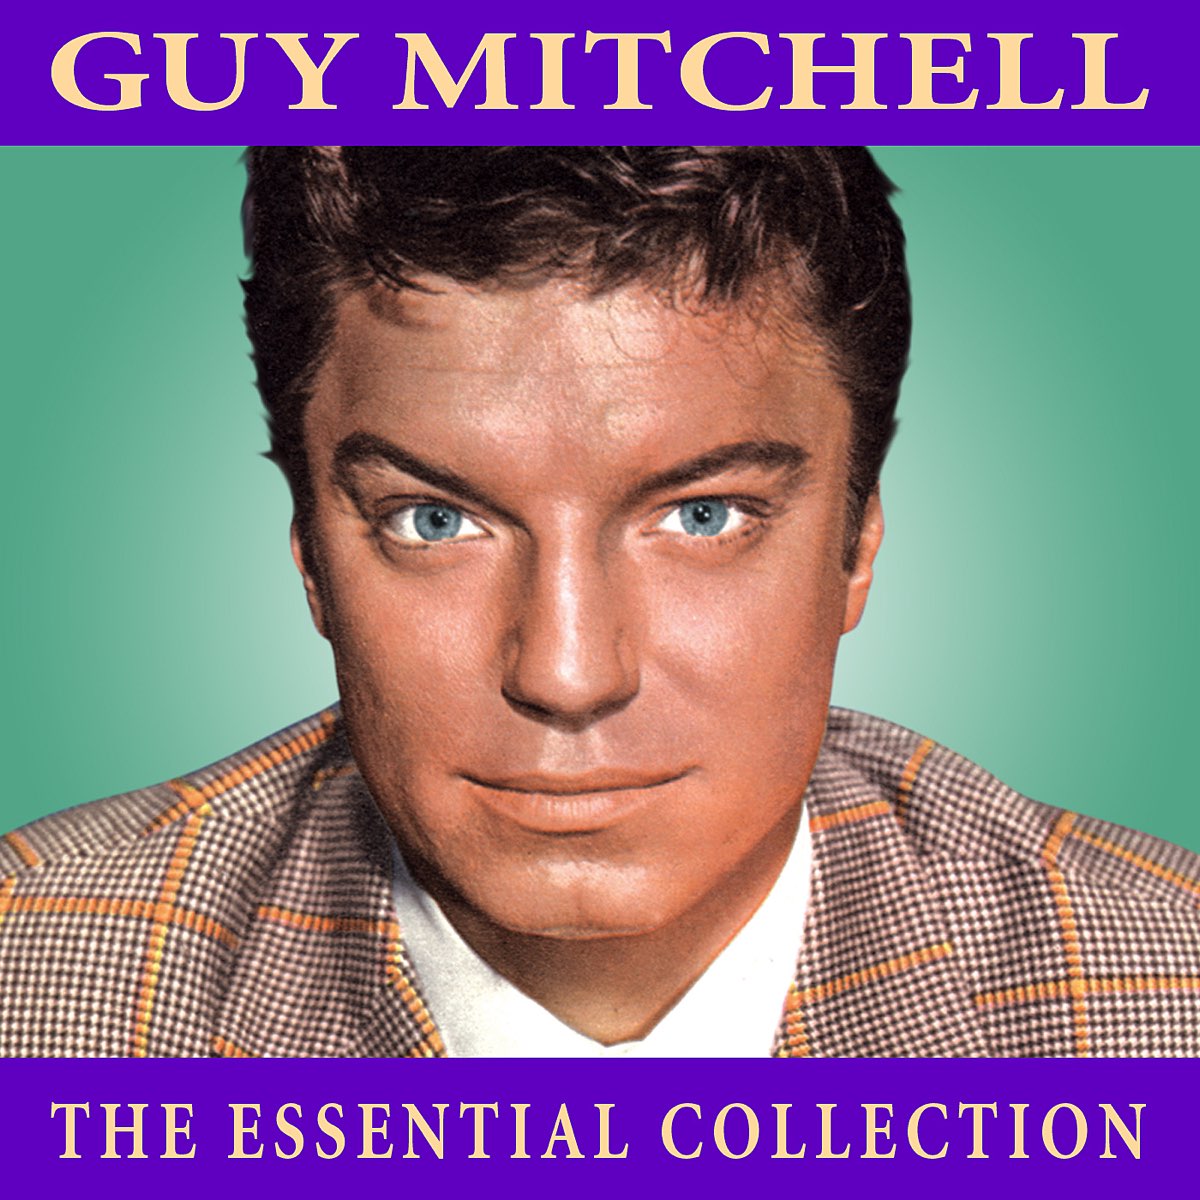 Kind guy. Guy Mitchell. Guy Mitchell 1970-ые. Слово guy.